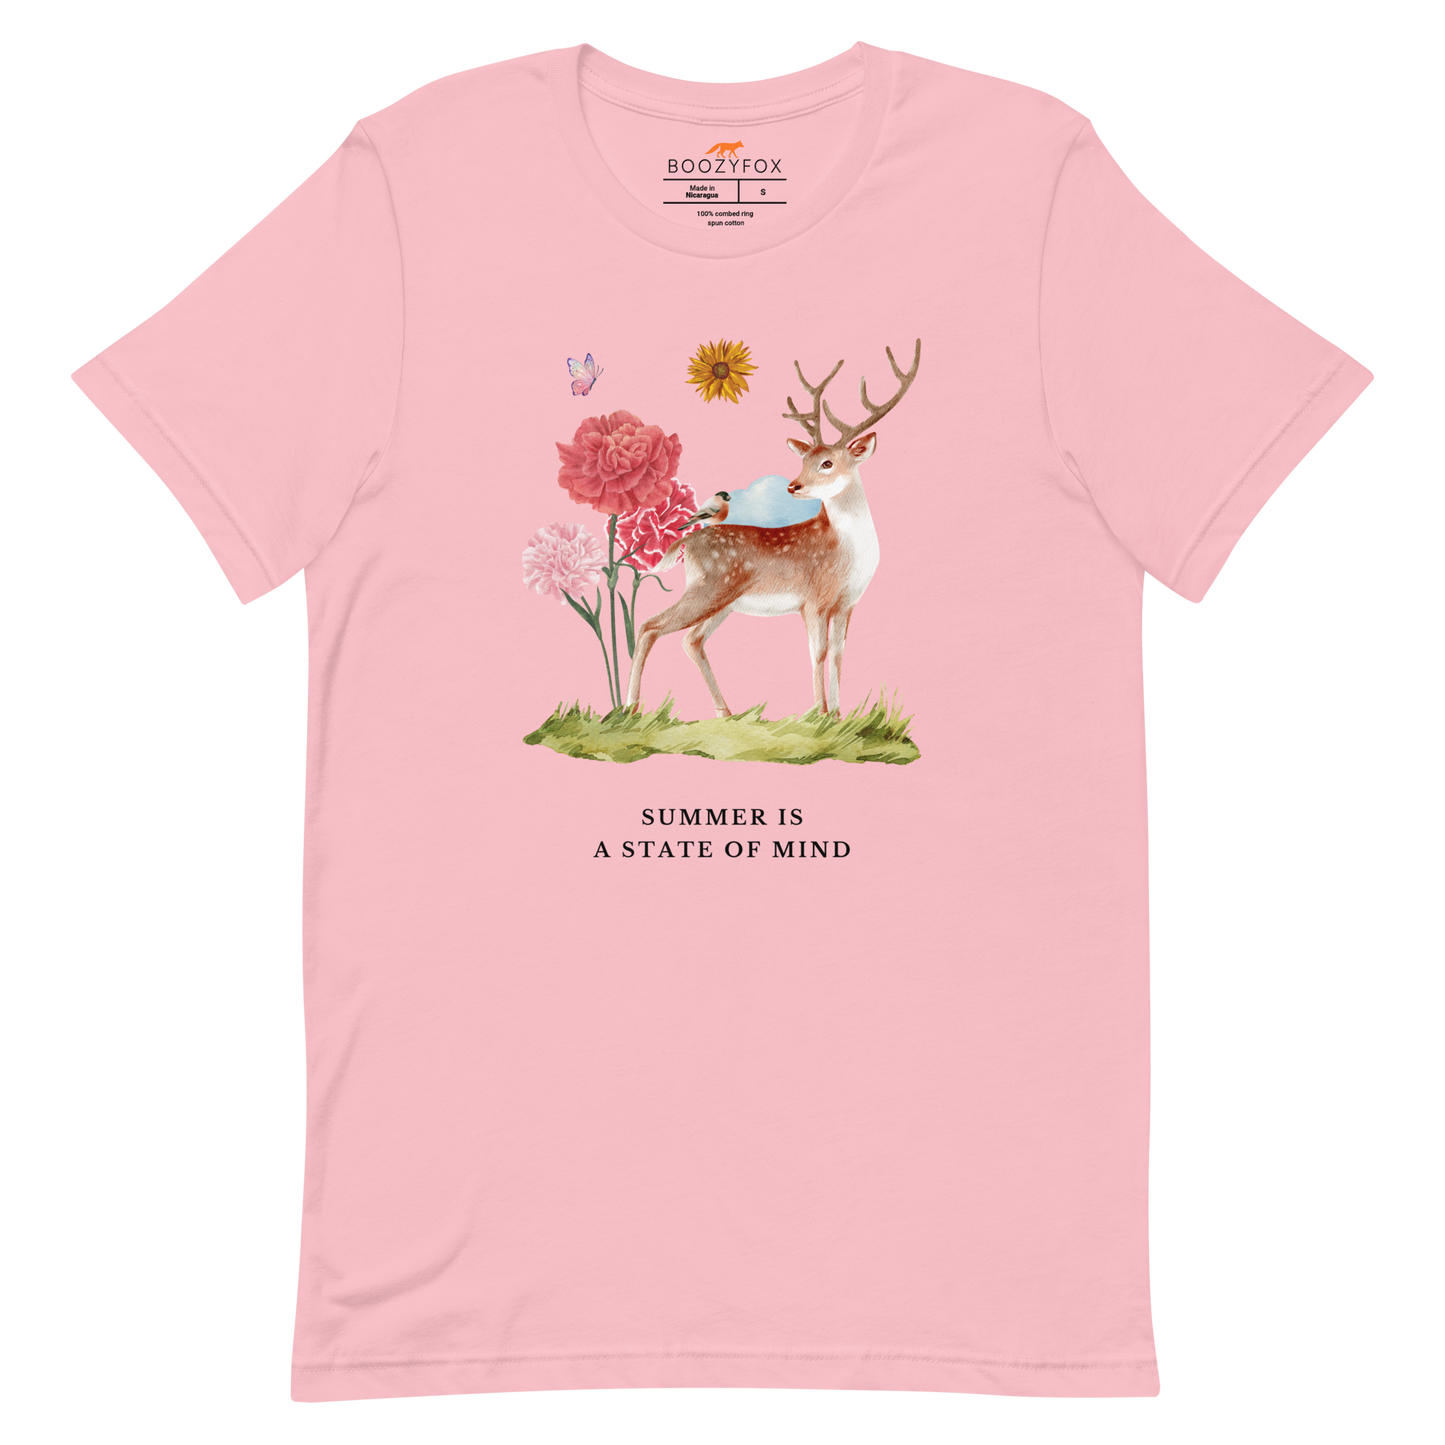 Pink Premium Summer Is a State of Mind Tee featuring a Summer Is a State of Mind graphic on the chest - Cute Graphic Summer Tees - Boozy Fox